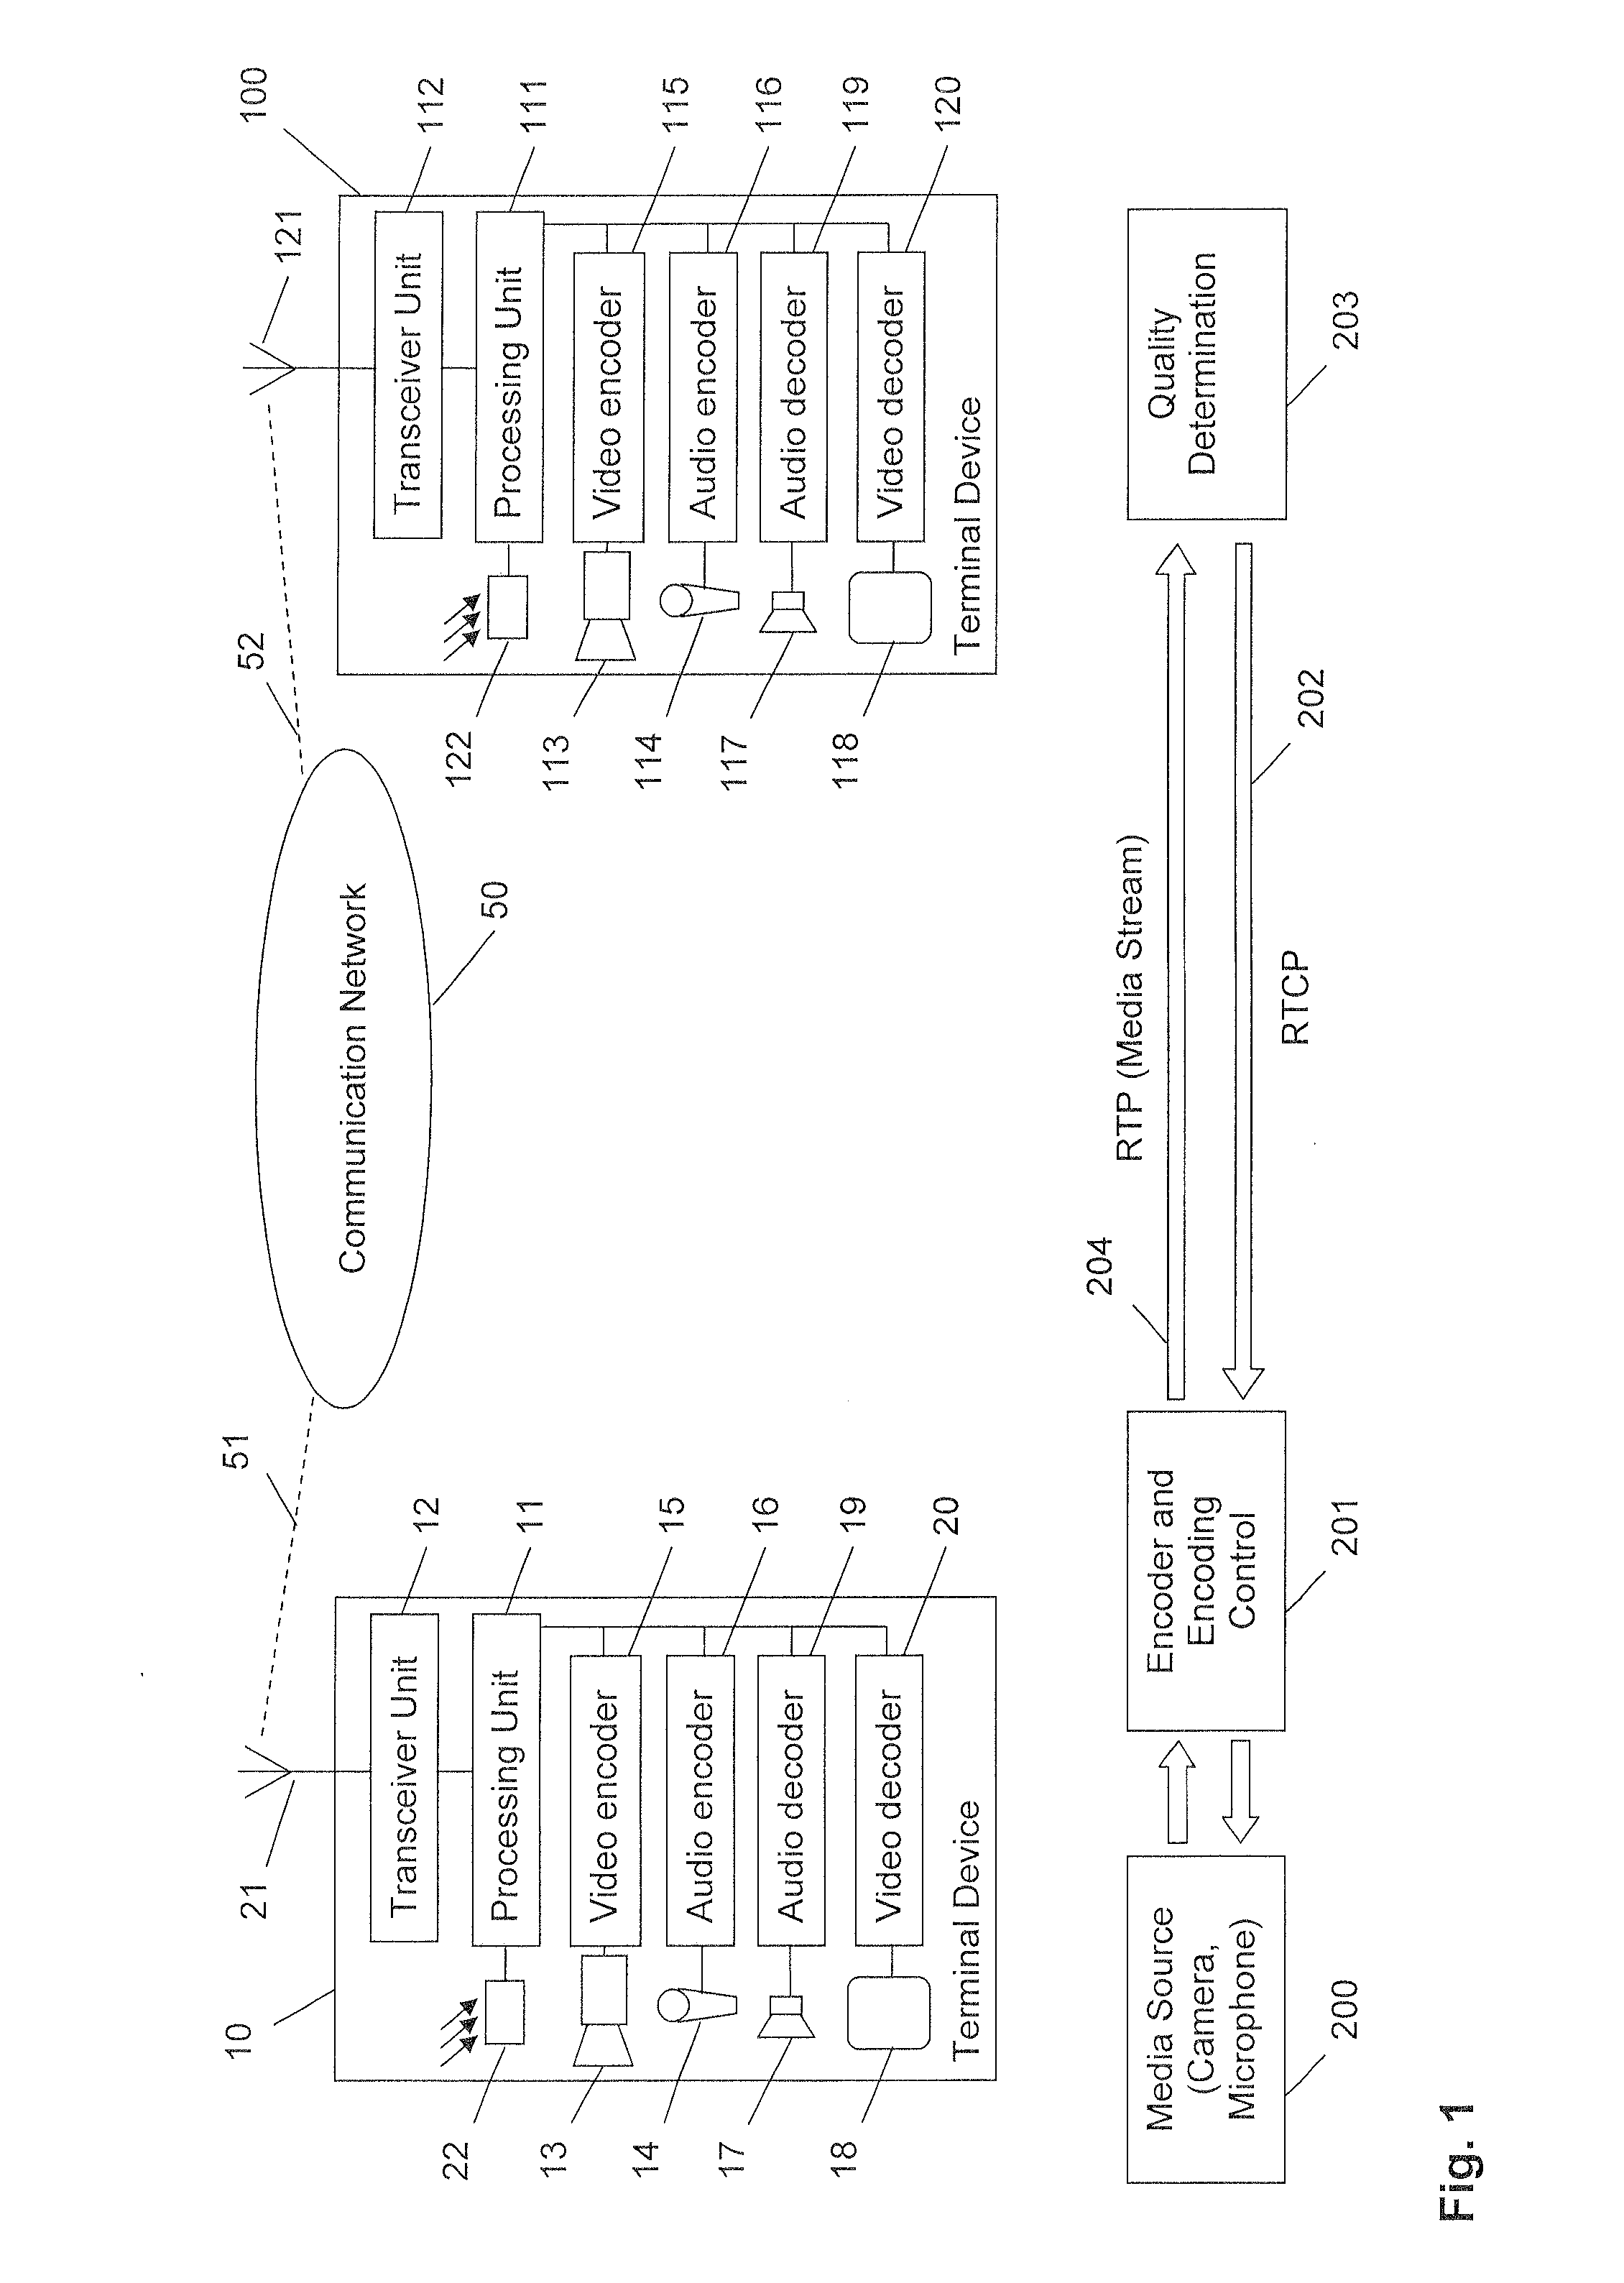 Operating a terminal device in a communication system